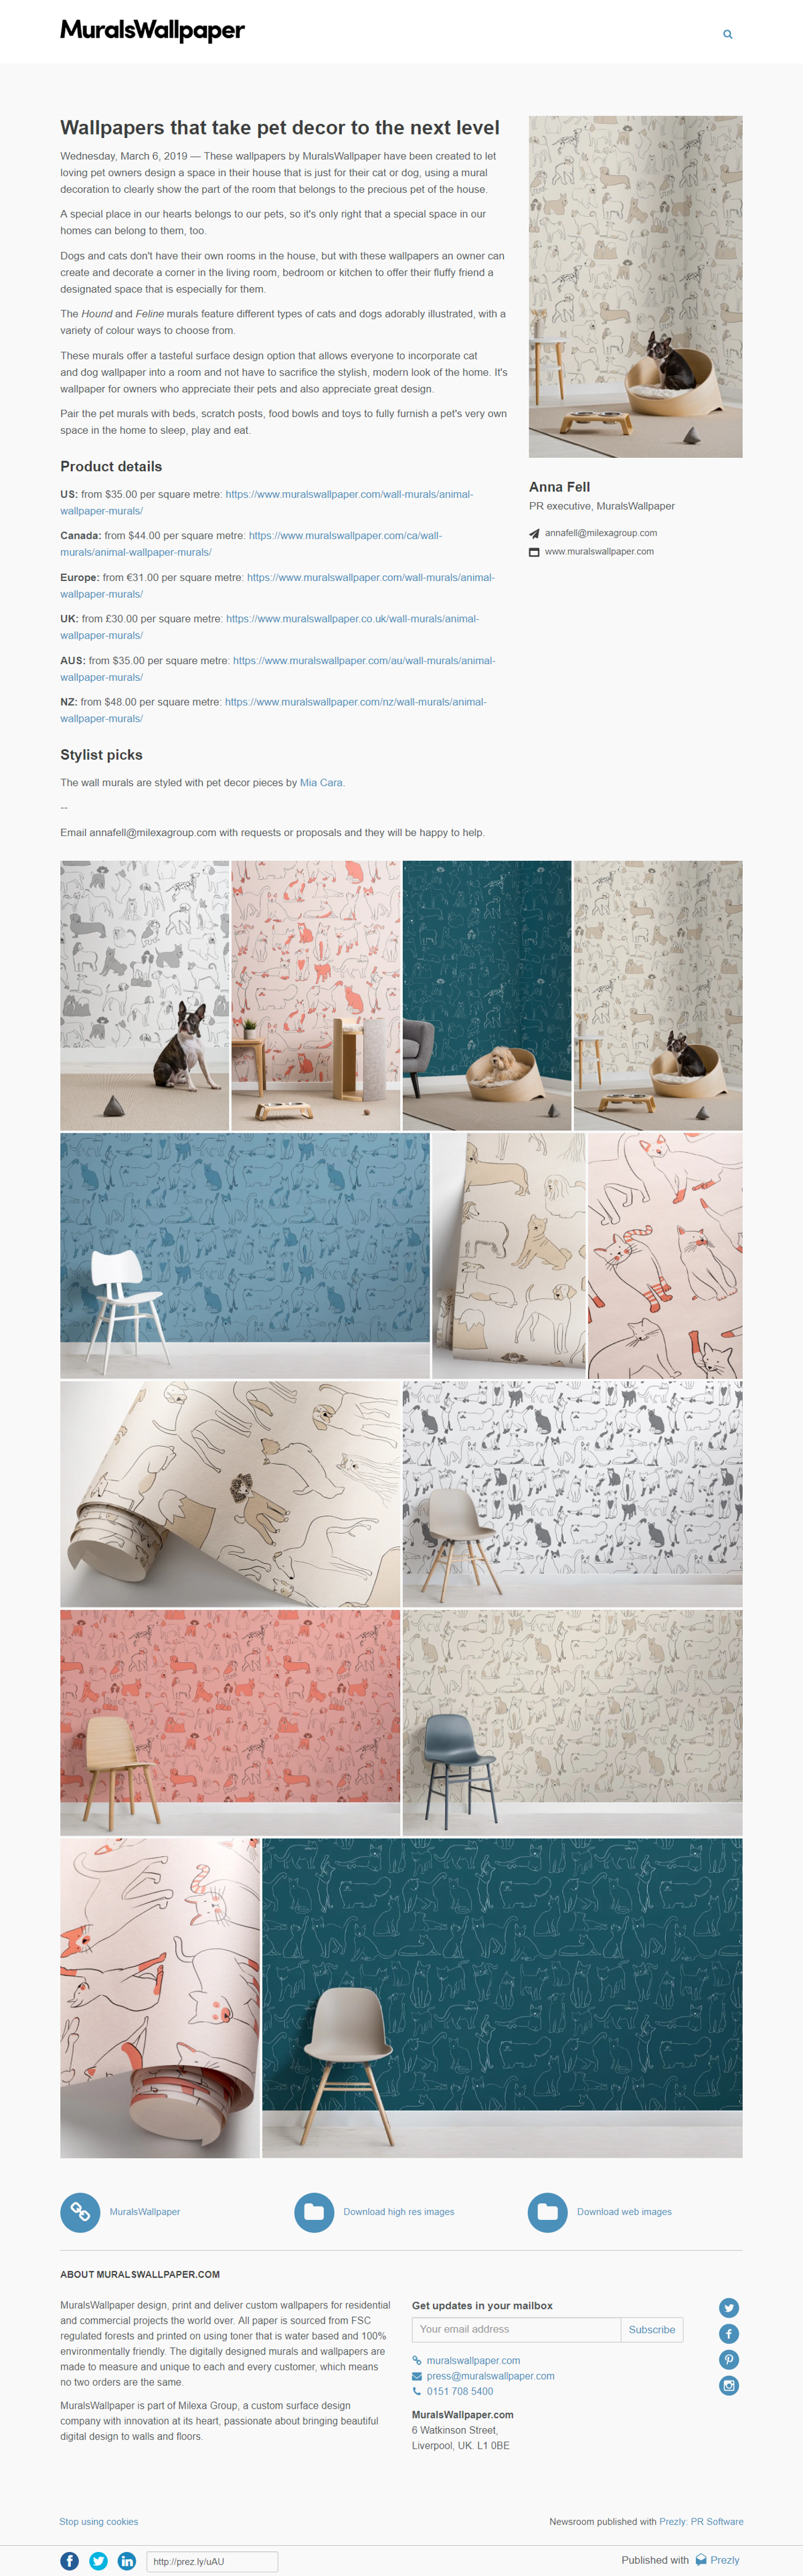 Wallpapers that take pet decor to the next level